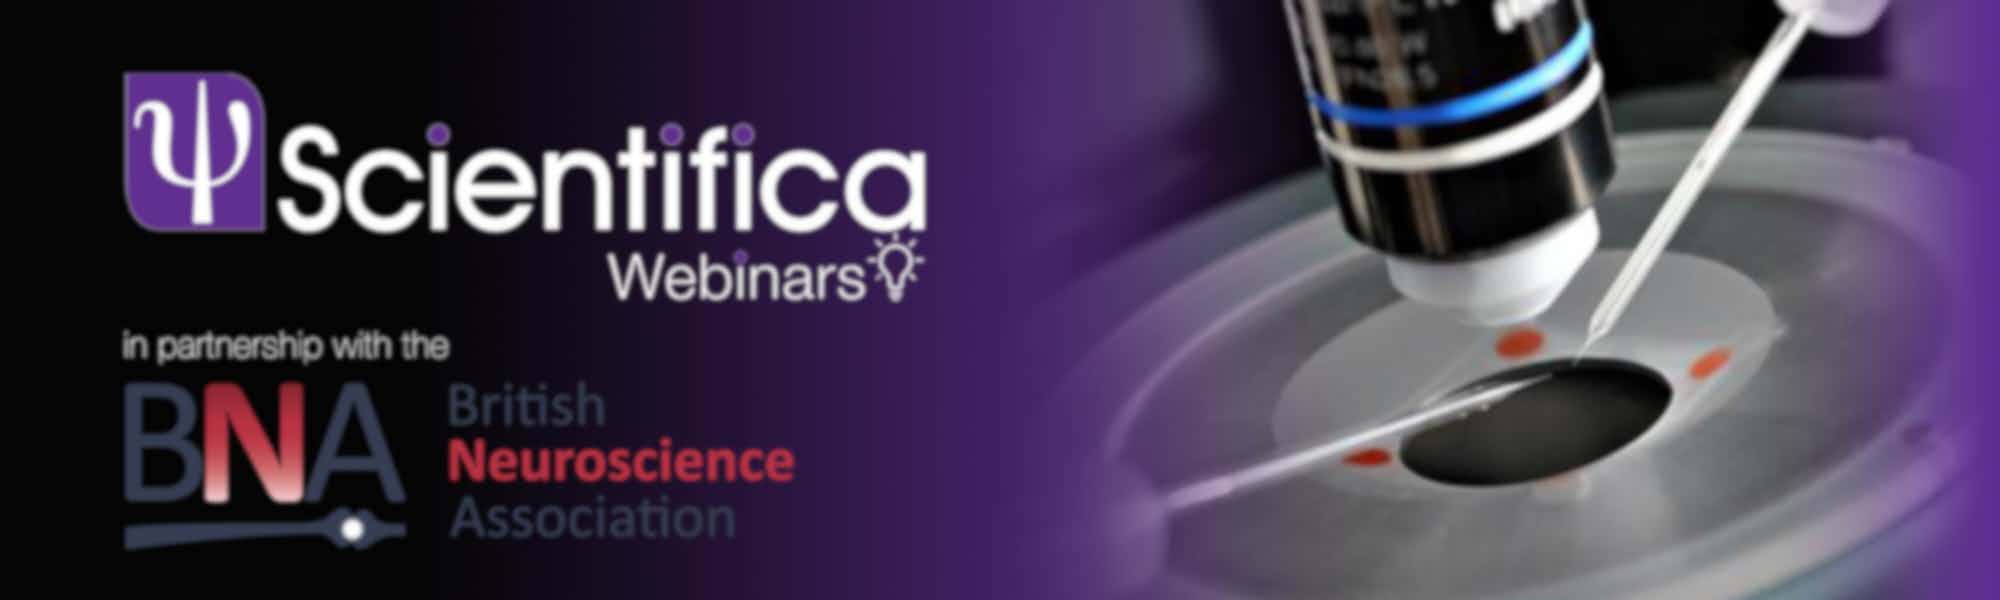 Webinar: Overcoming the challenges of patch clamping